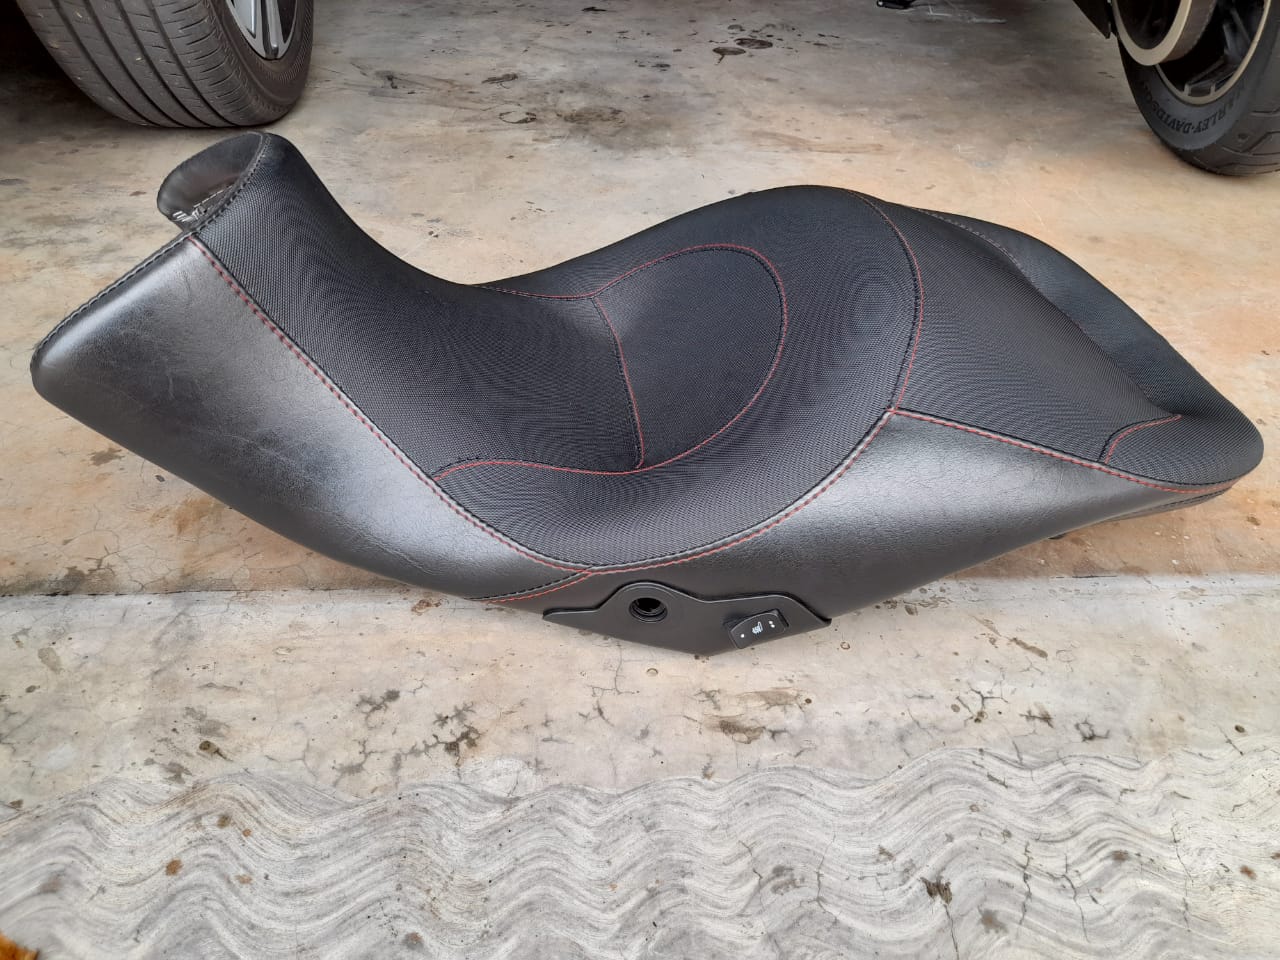 1 x BMW Seat for K1600GTL or K1600GT for sale